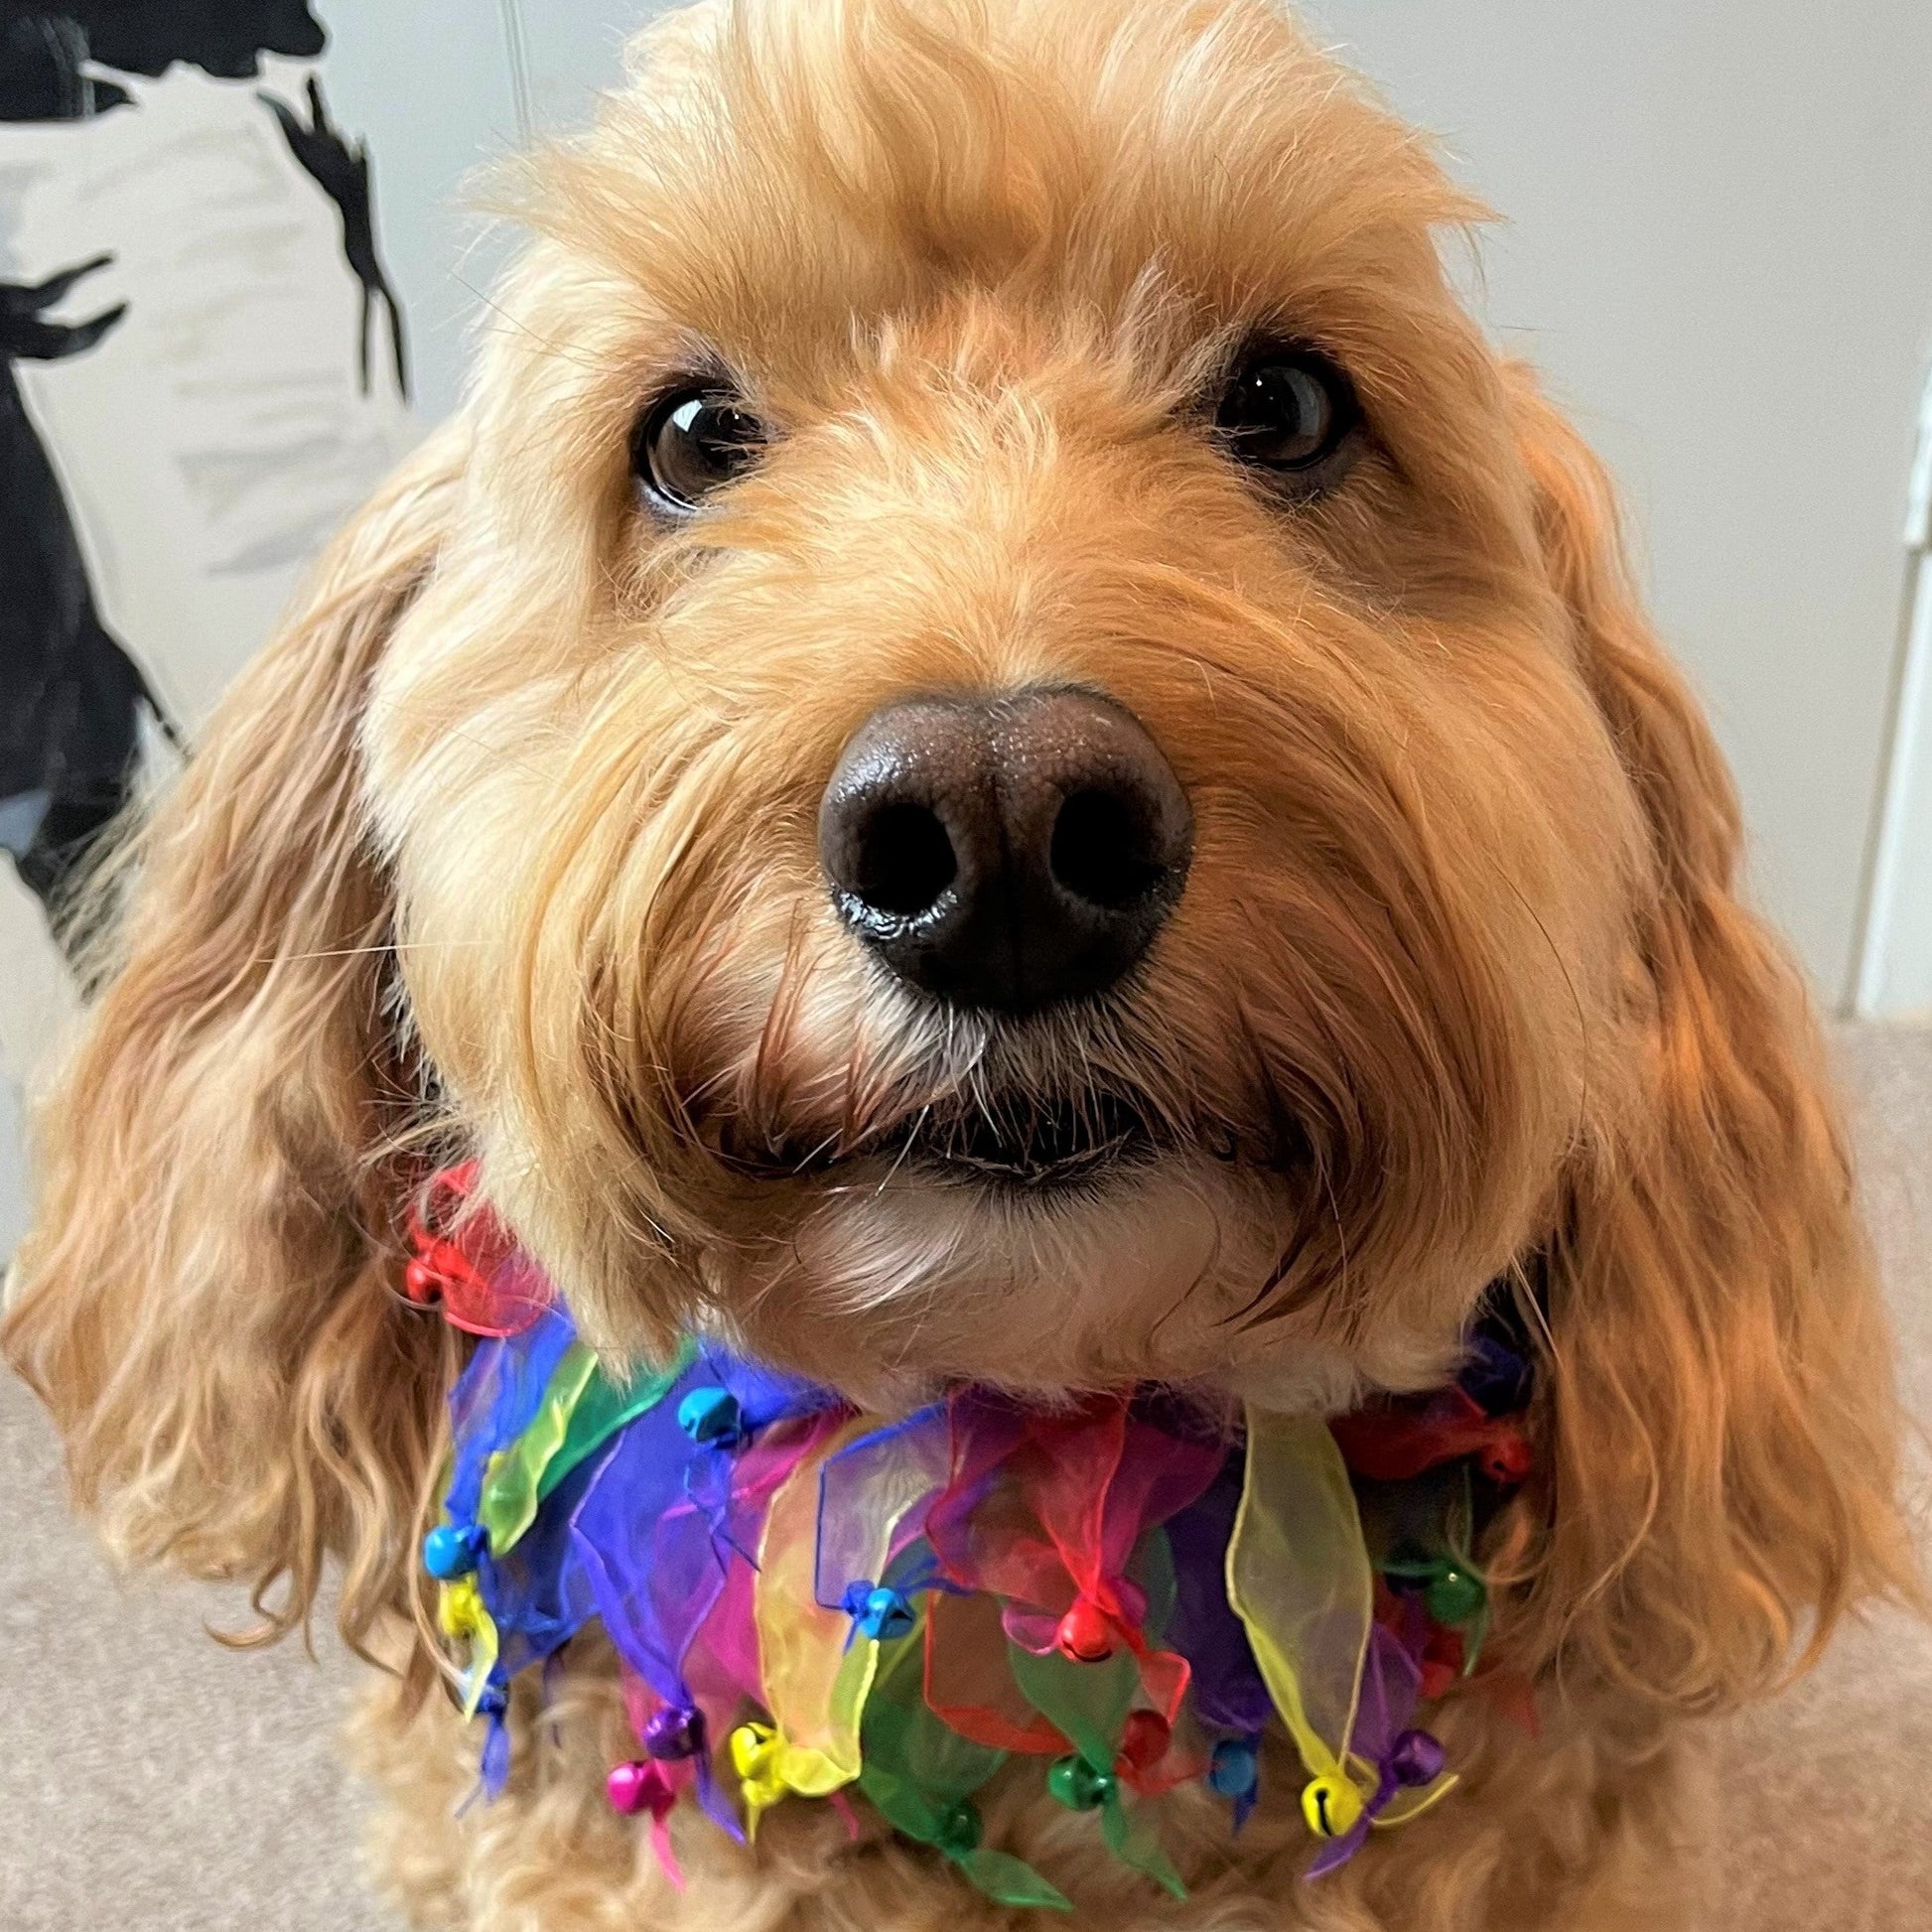 carnival colour dog frill collar with bells